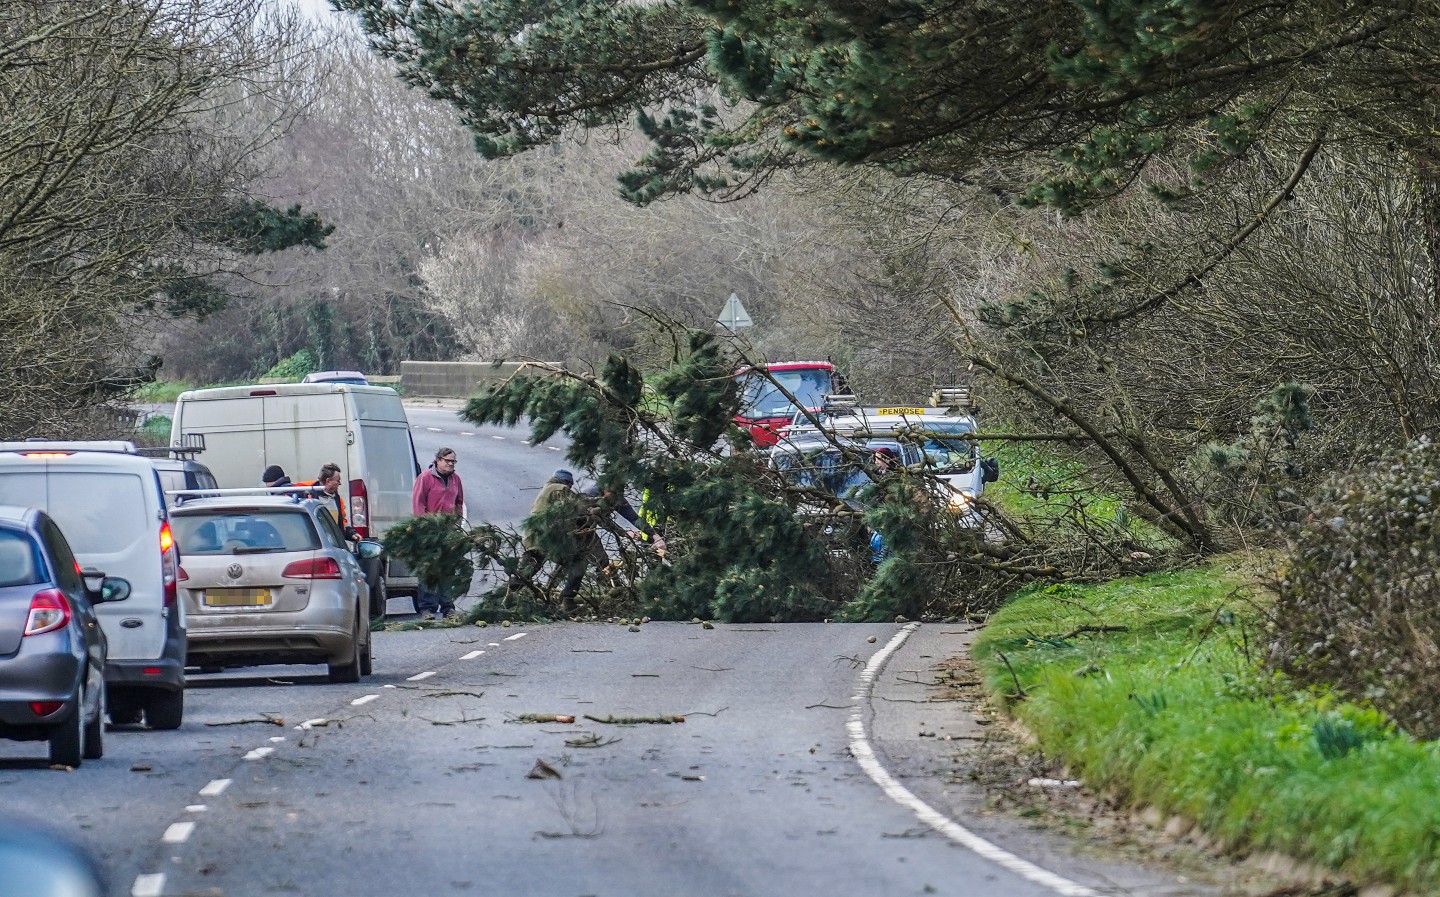 More disruption on UK roads as new storms follow Eunice and Franklin